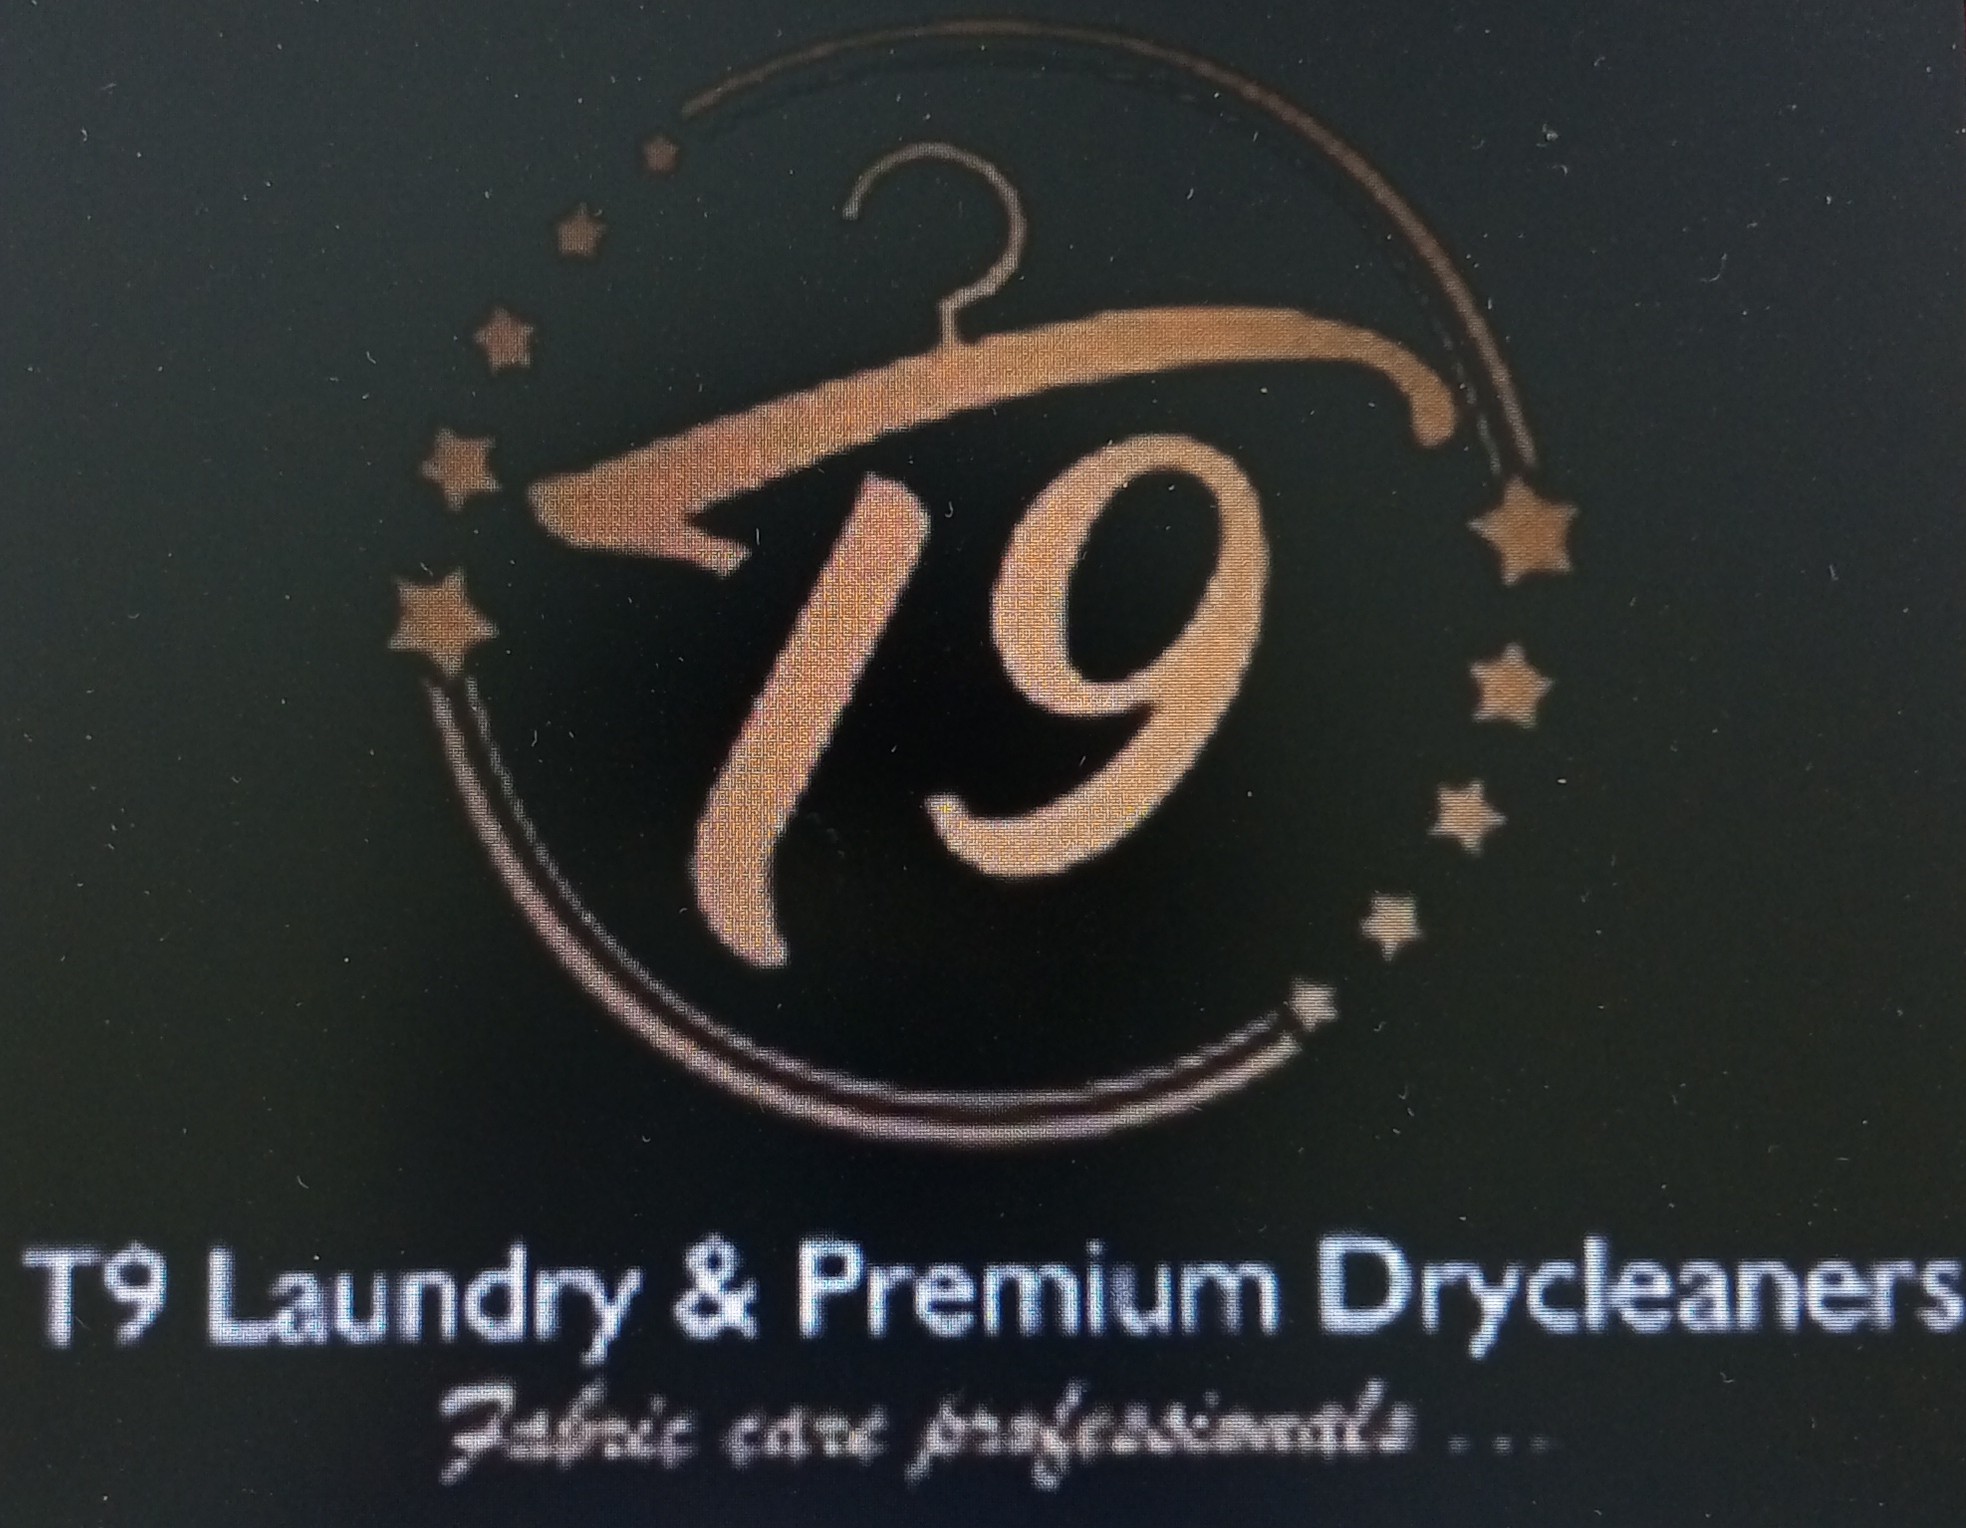 T9 Laundry and Premium Drycleaners Ltd